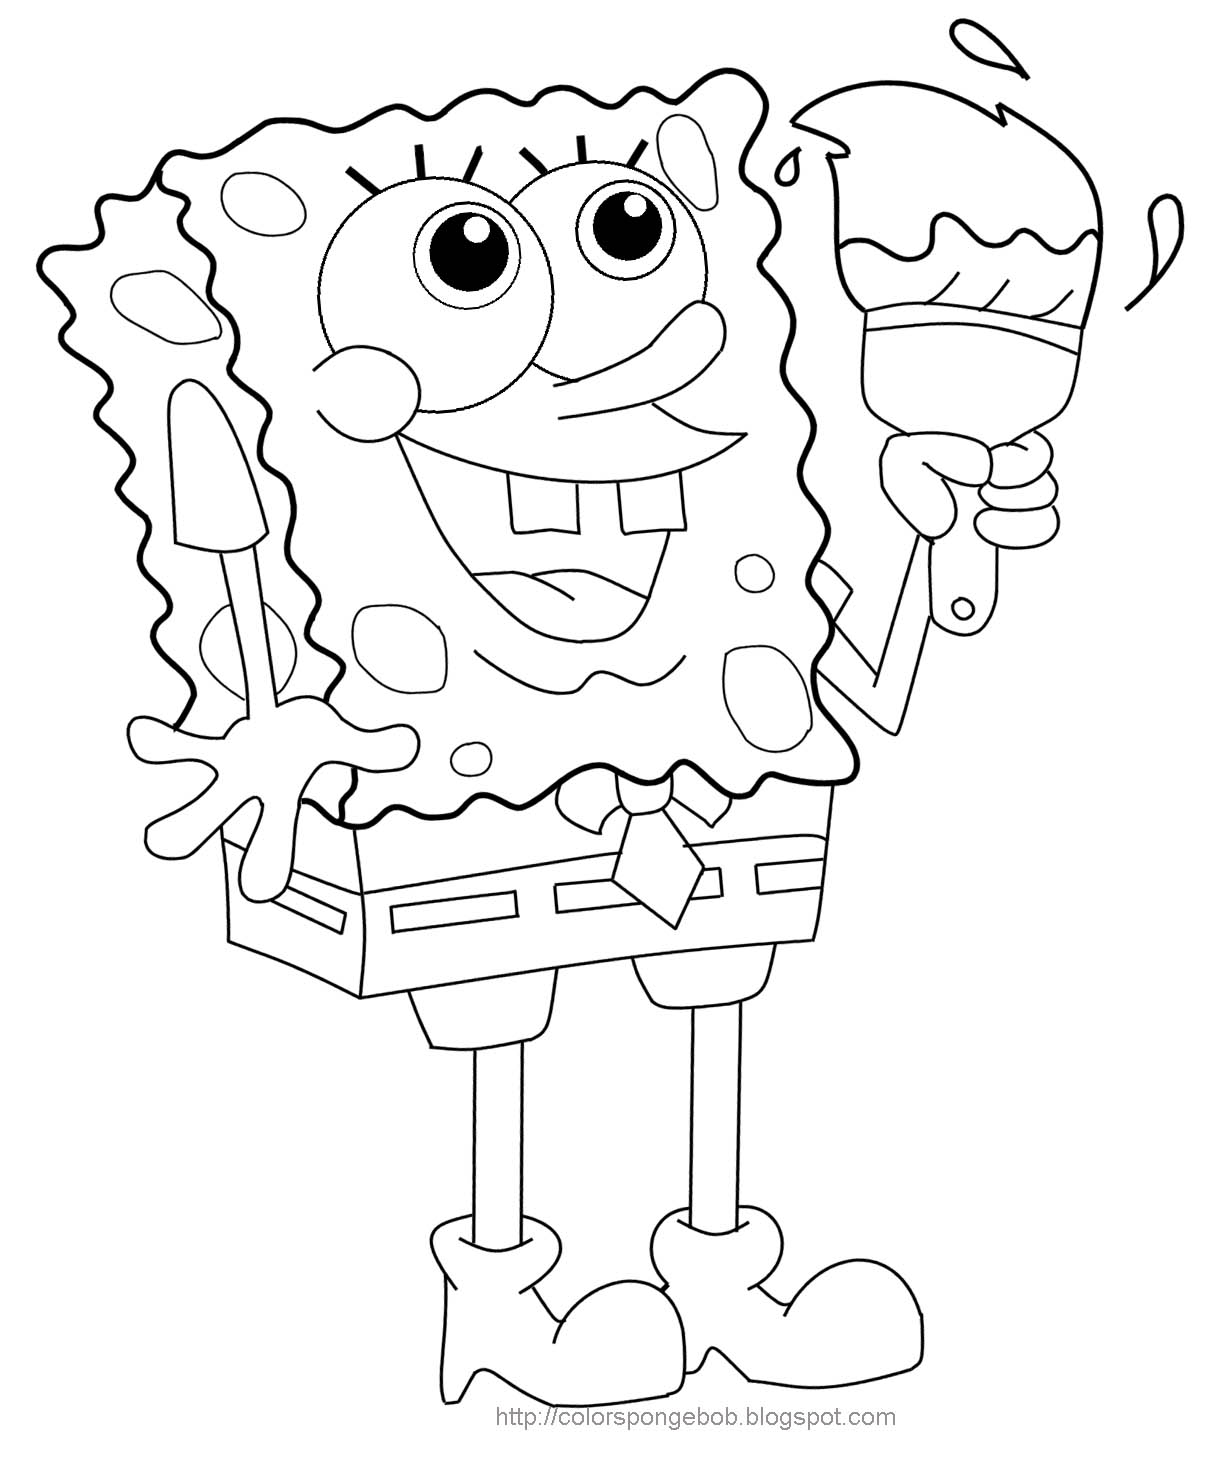 coloring pages of sopngebob - photo #42